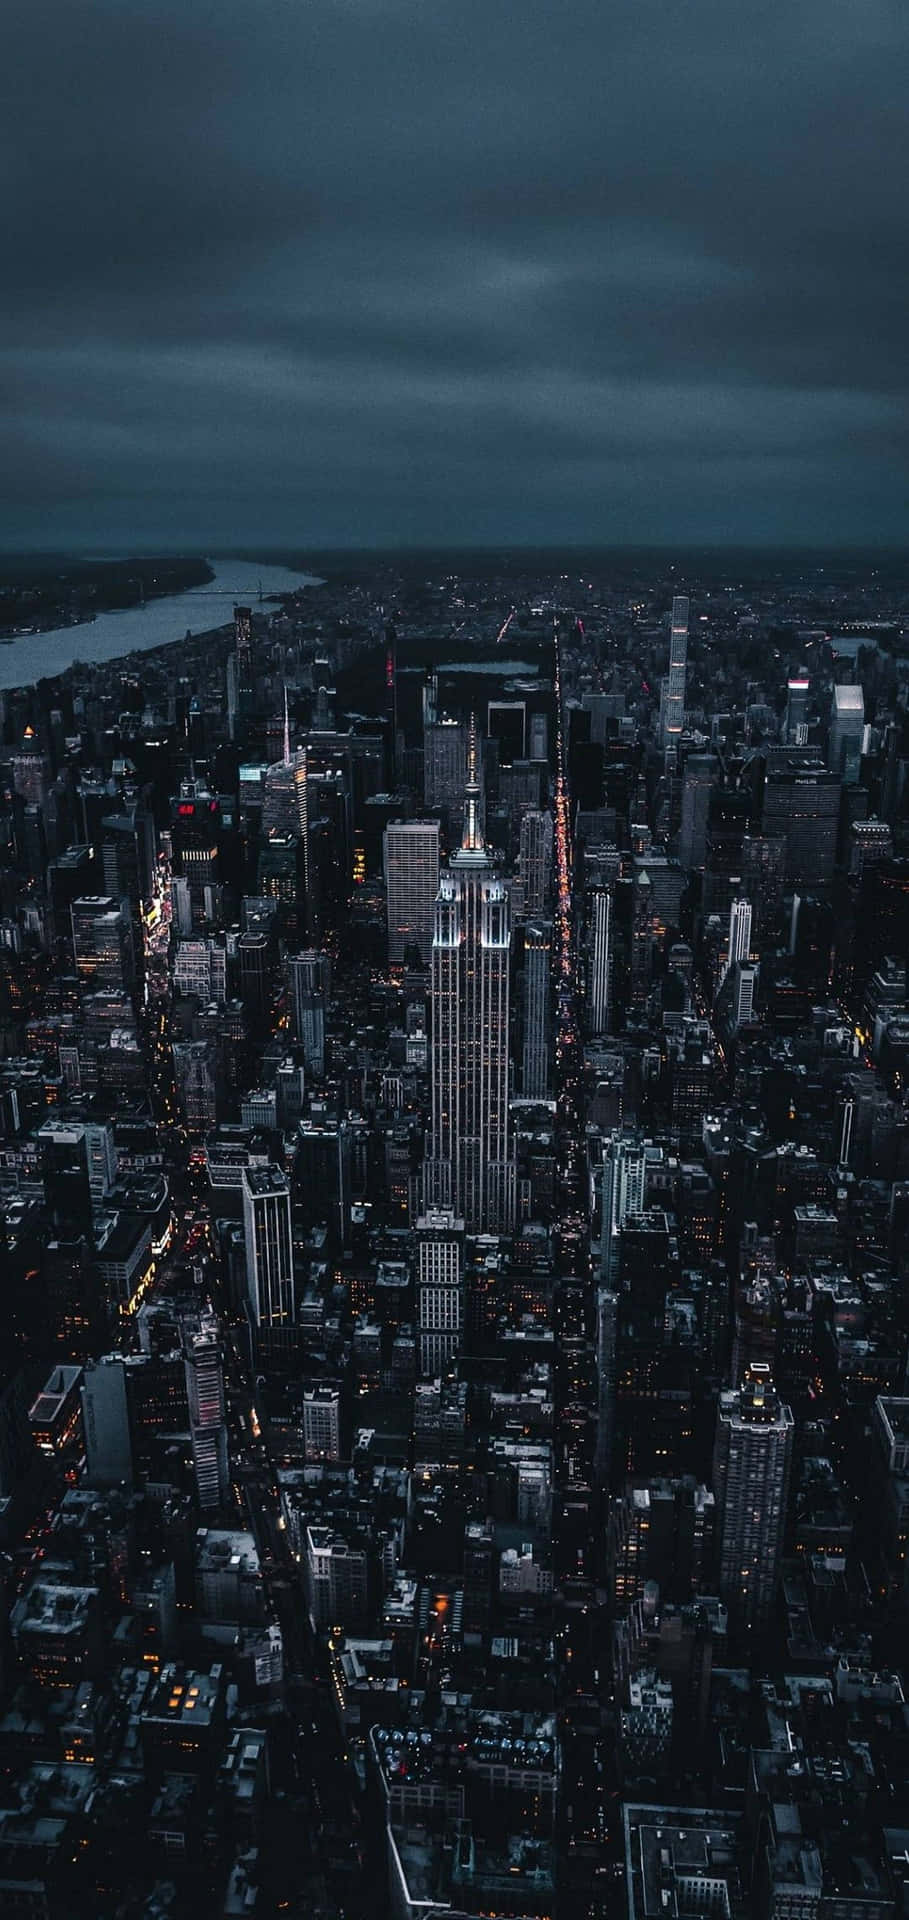 A modern, vibrant look of New York City illuminated with Android lights